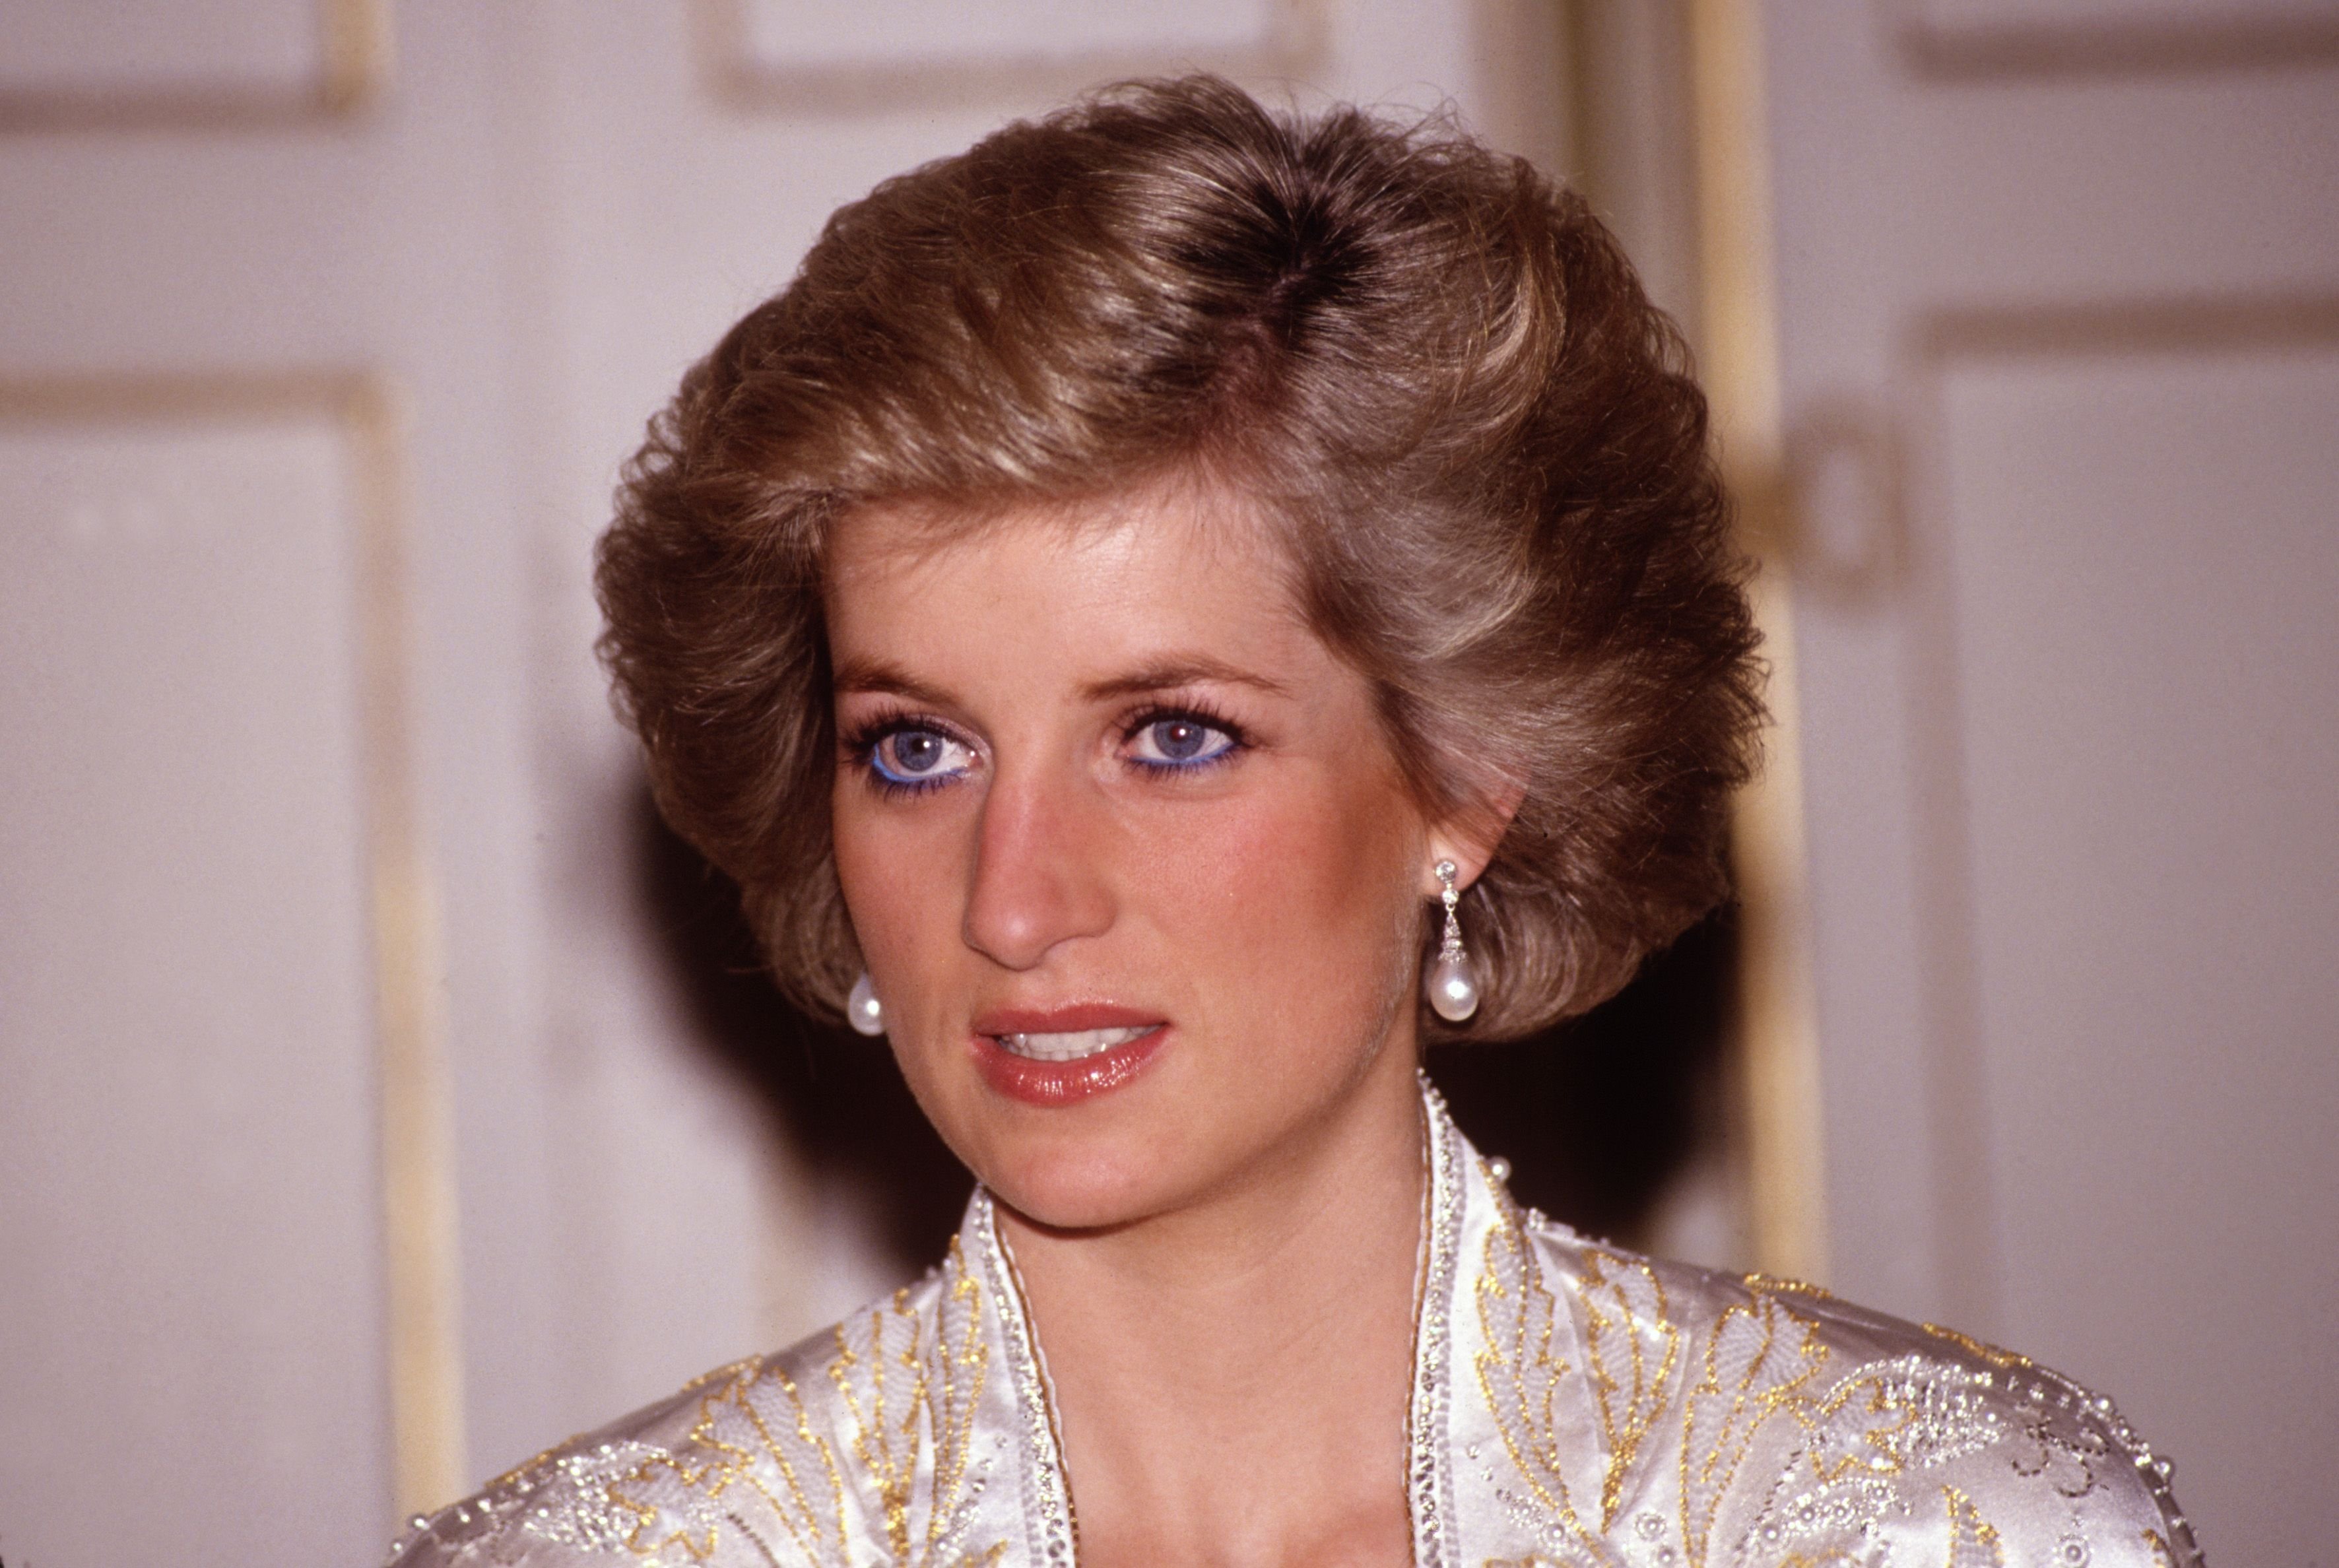 Princess Diana at the Elysee Palace in 1988 in Paris, France | Source: Getty Images